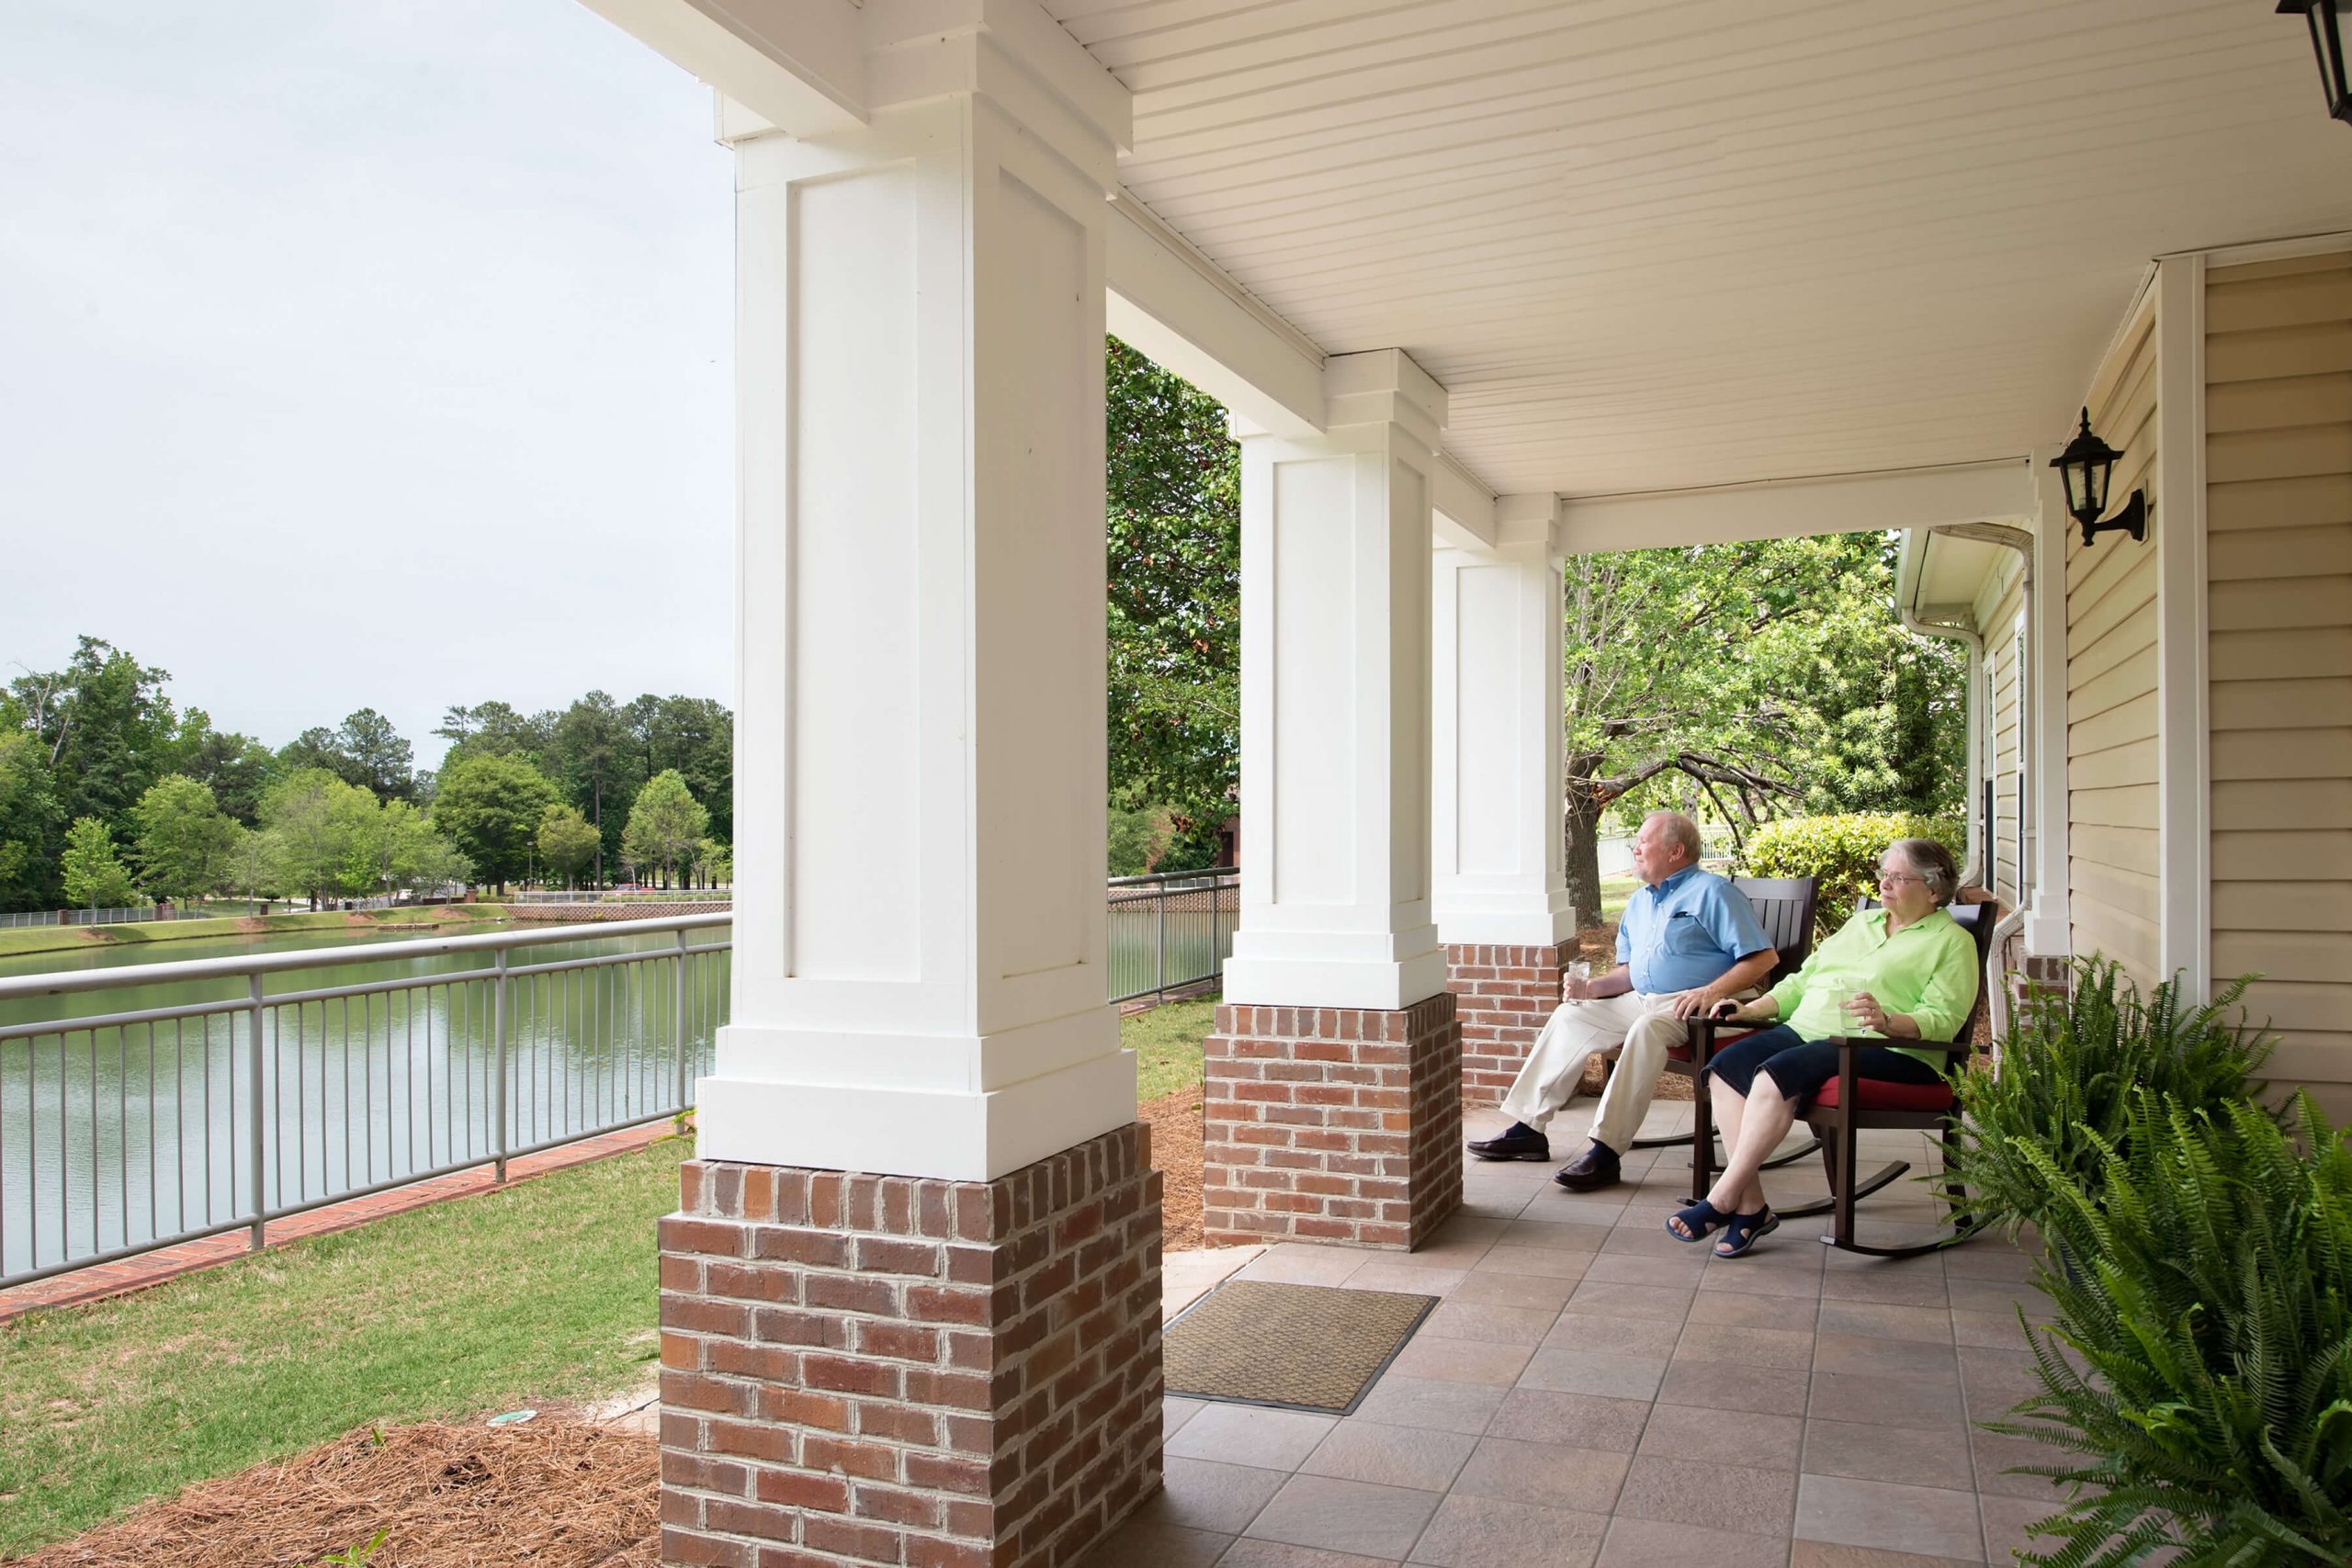 When Is the “Right Time” for Senior Living?